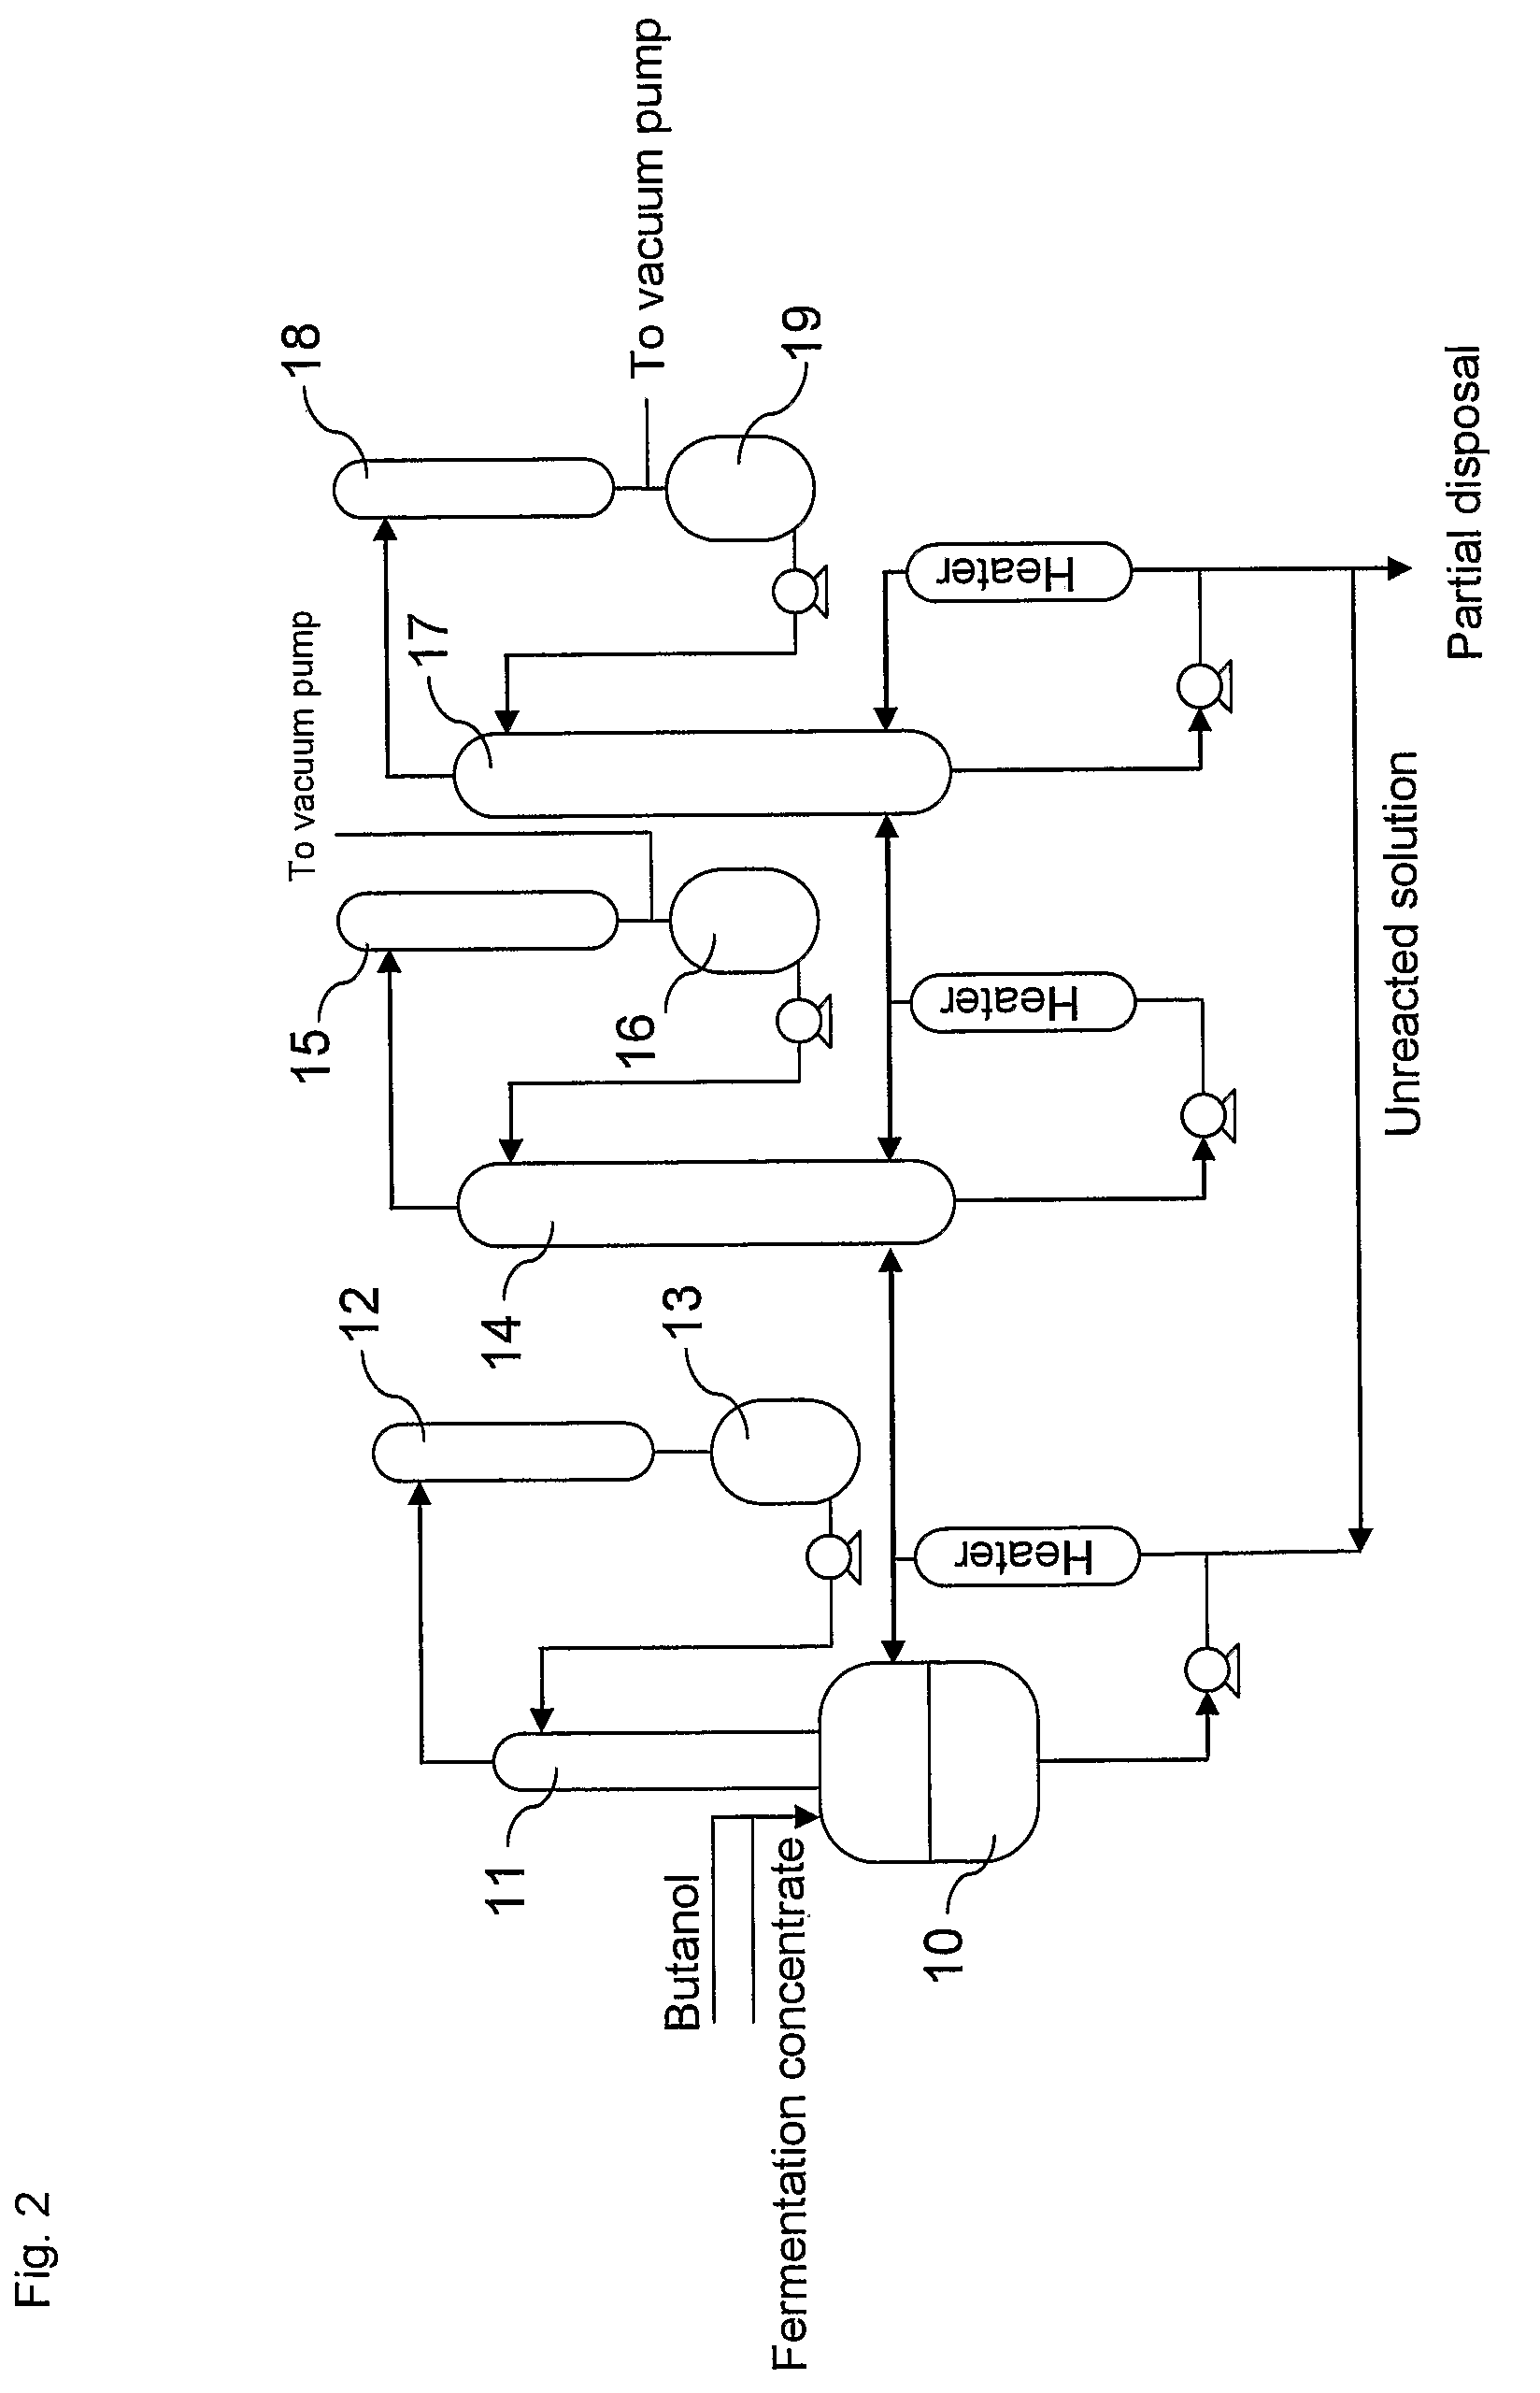 Method for producing lactic acid ester